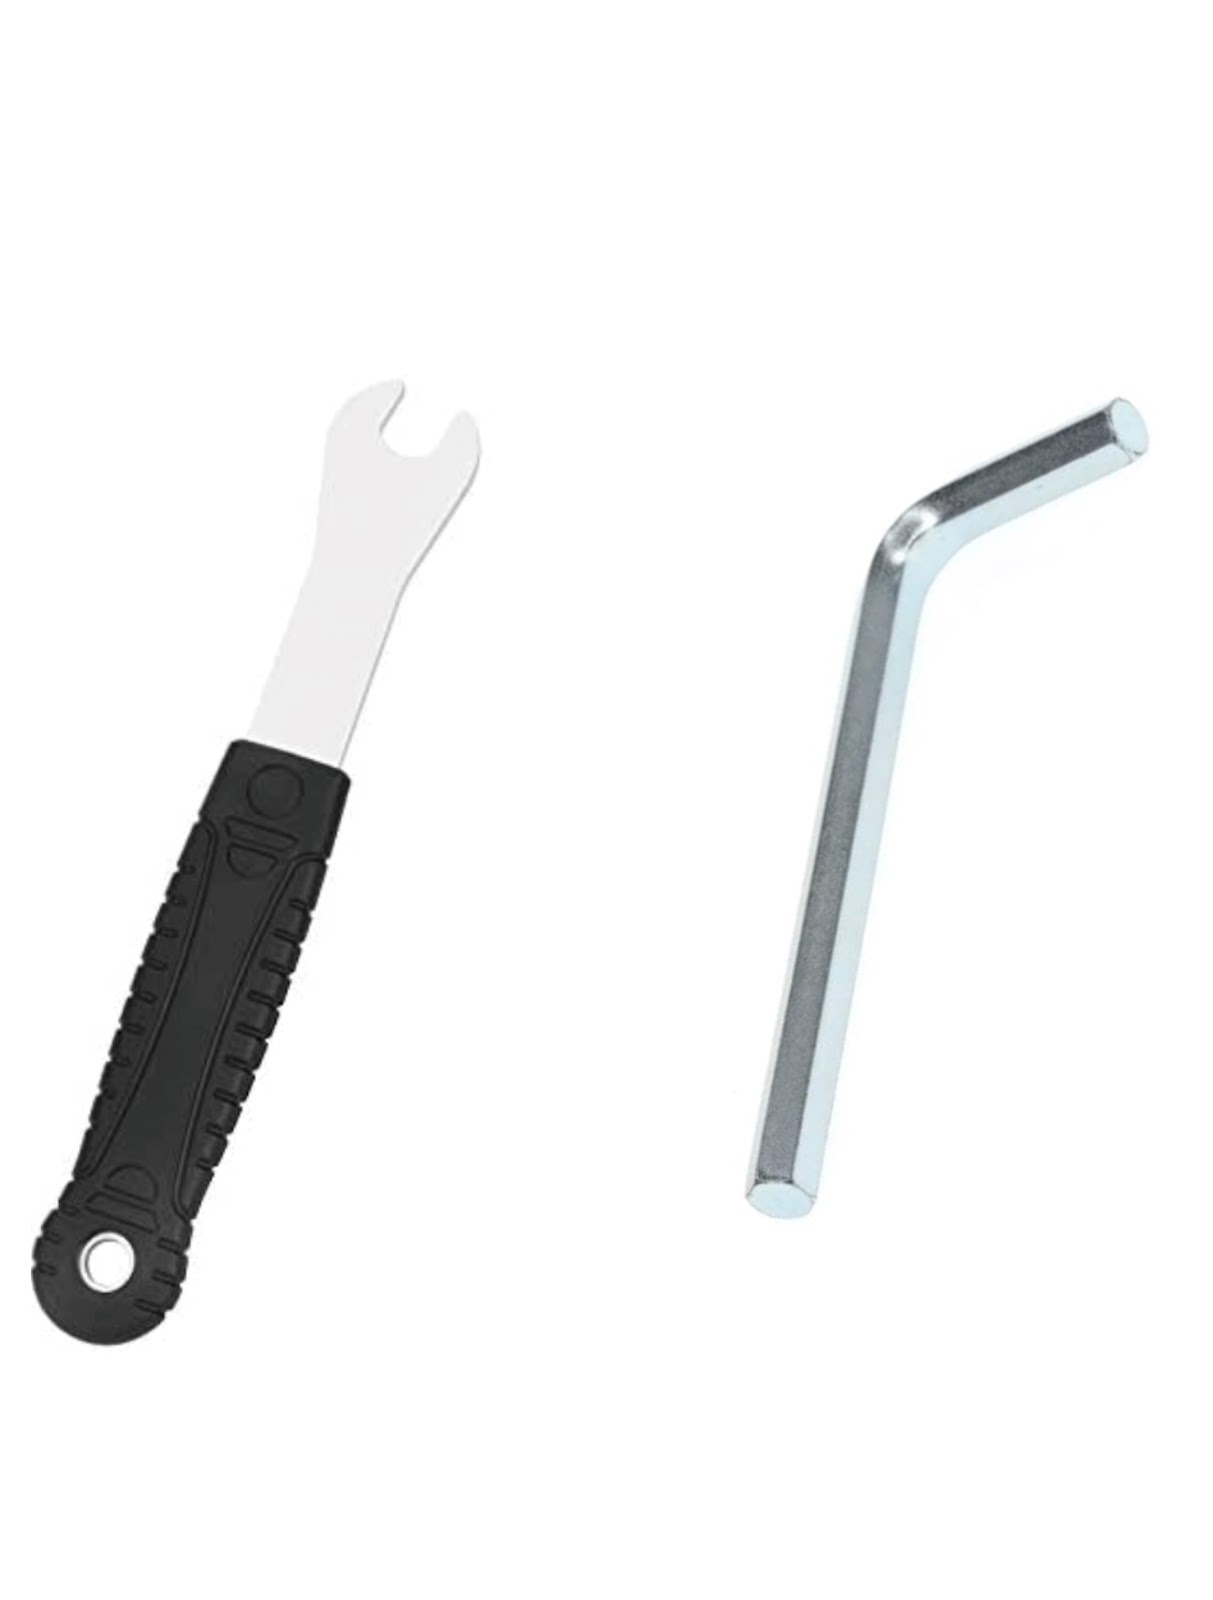 To remove mountain bike pedals you will need either one of these tools depending on the actual pedals.